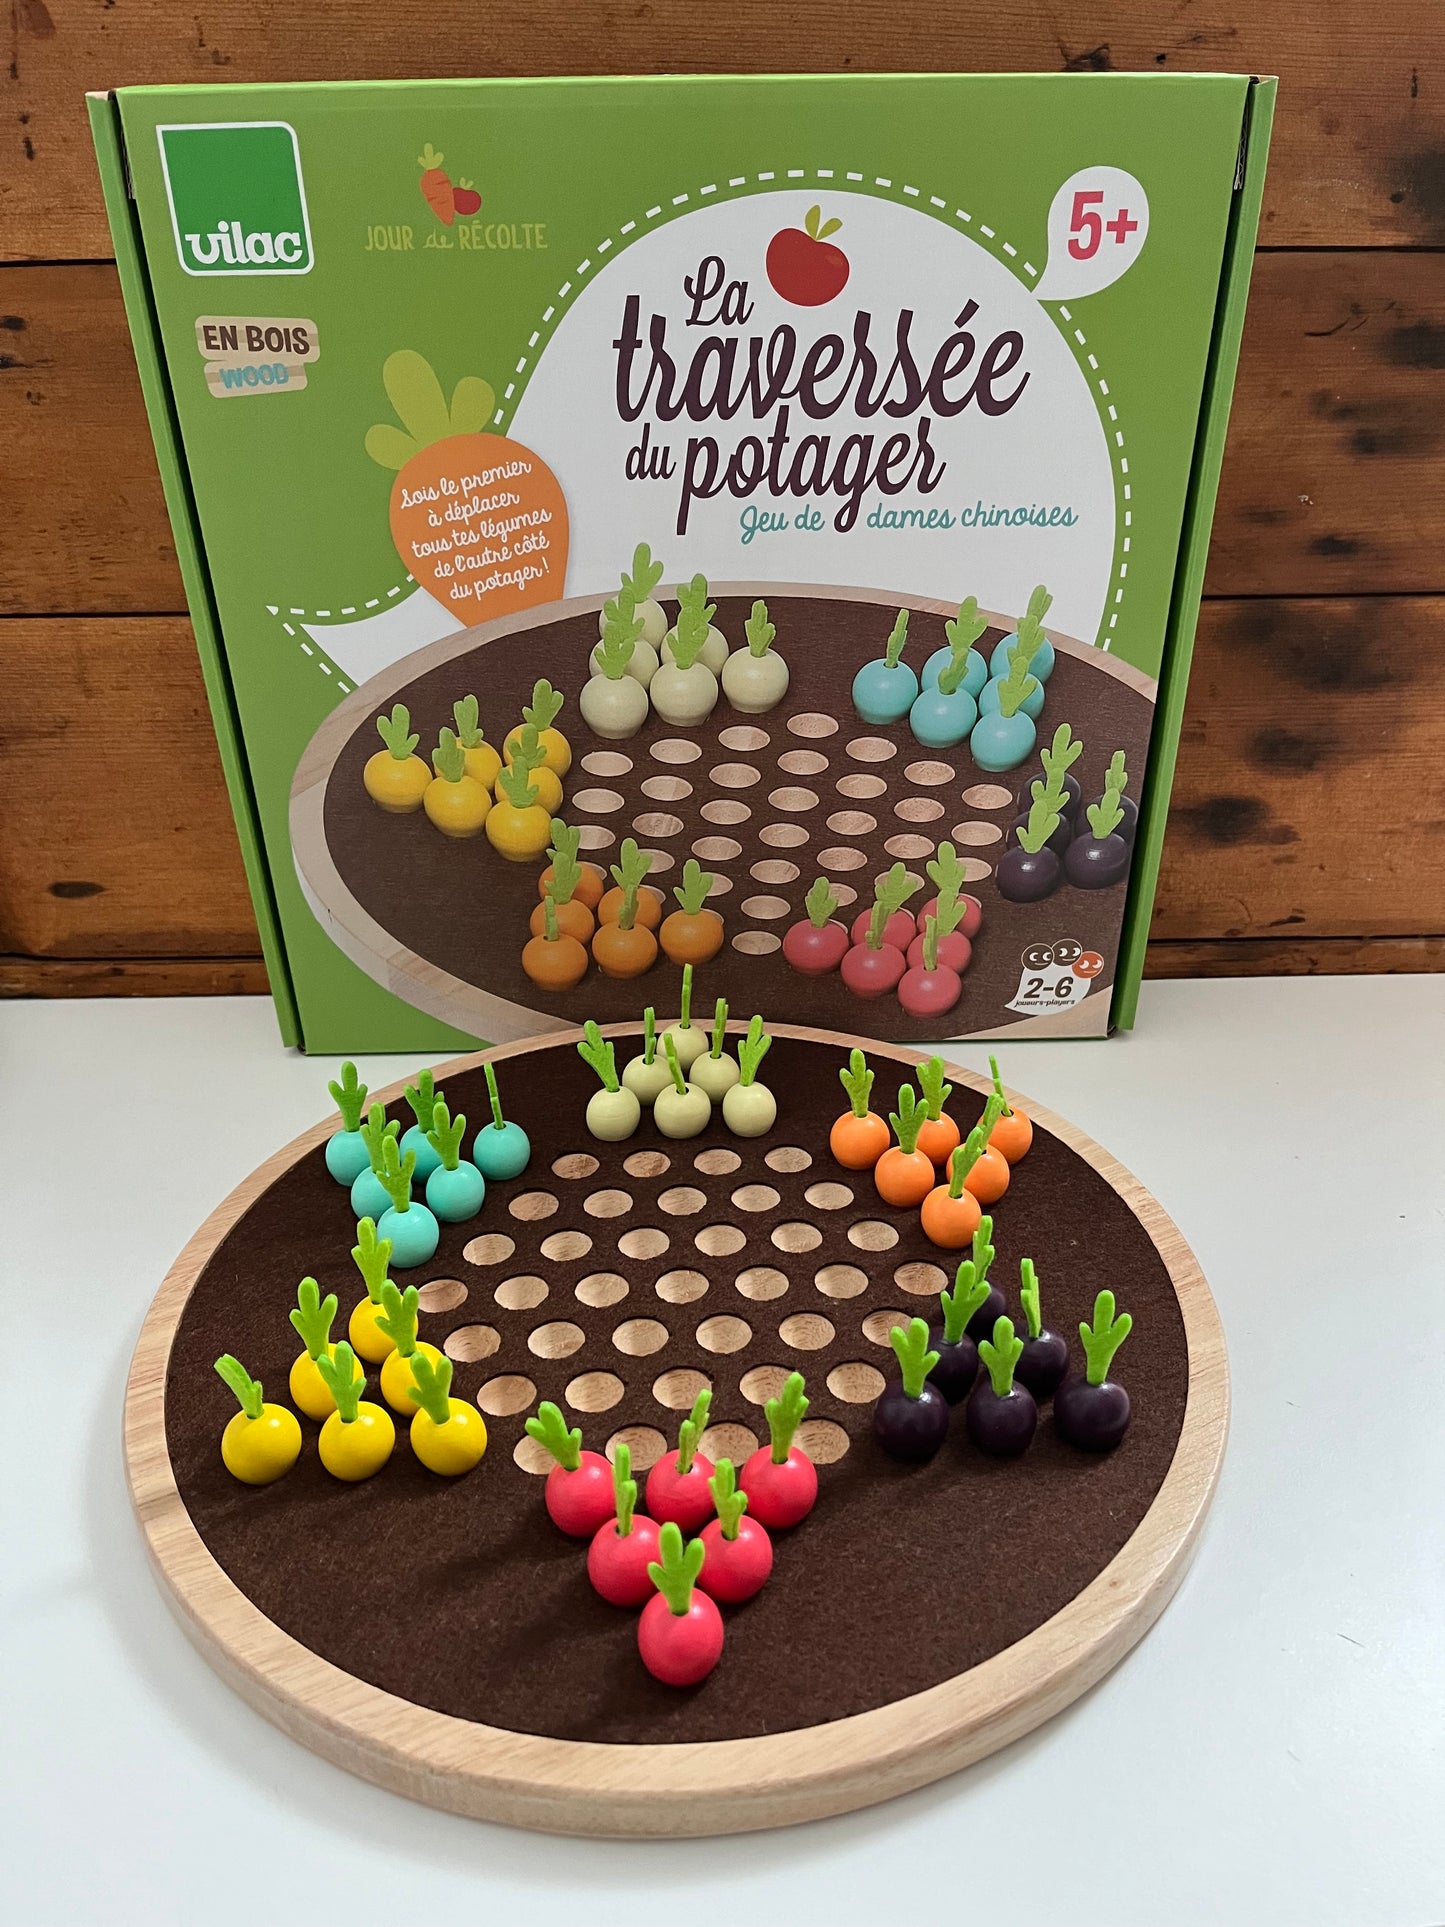 Wooden Family Game - VEGGIE CHINESE CHECKERS!